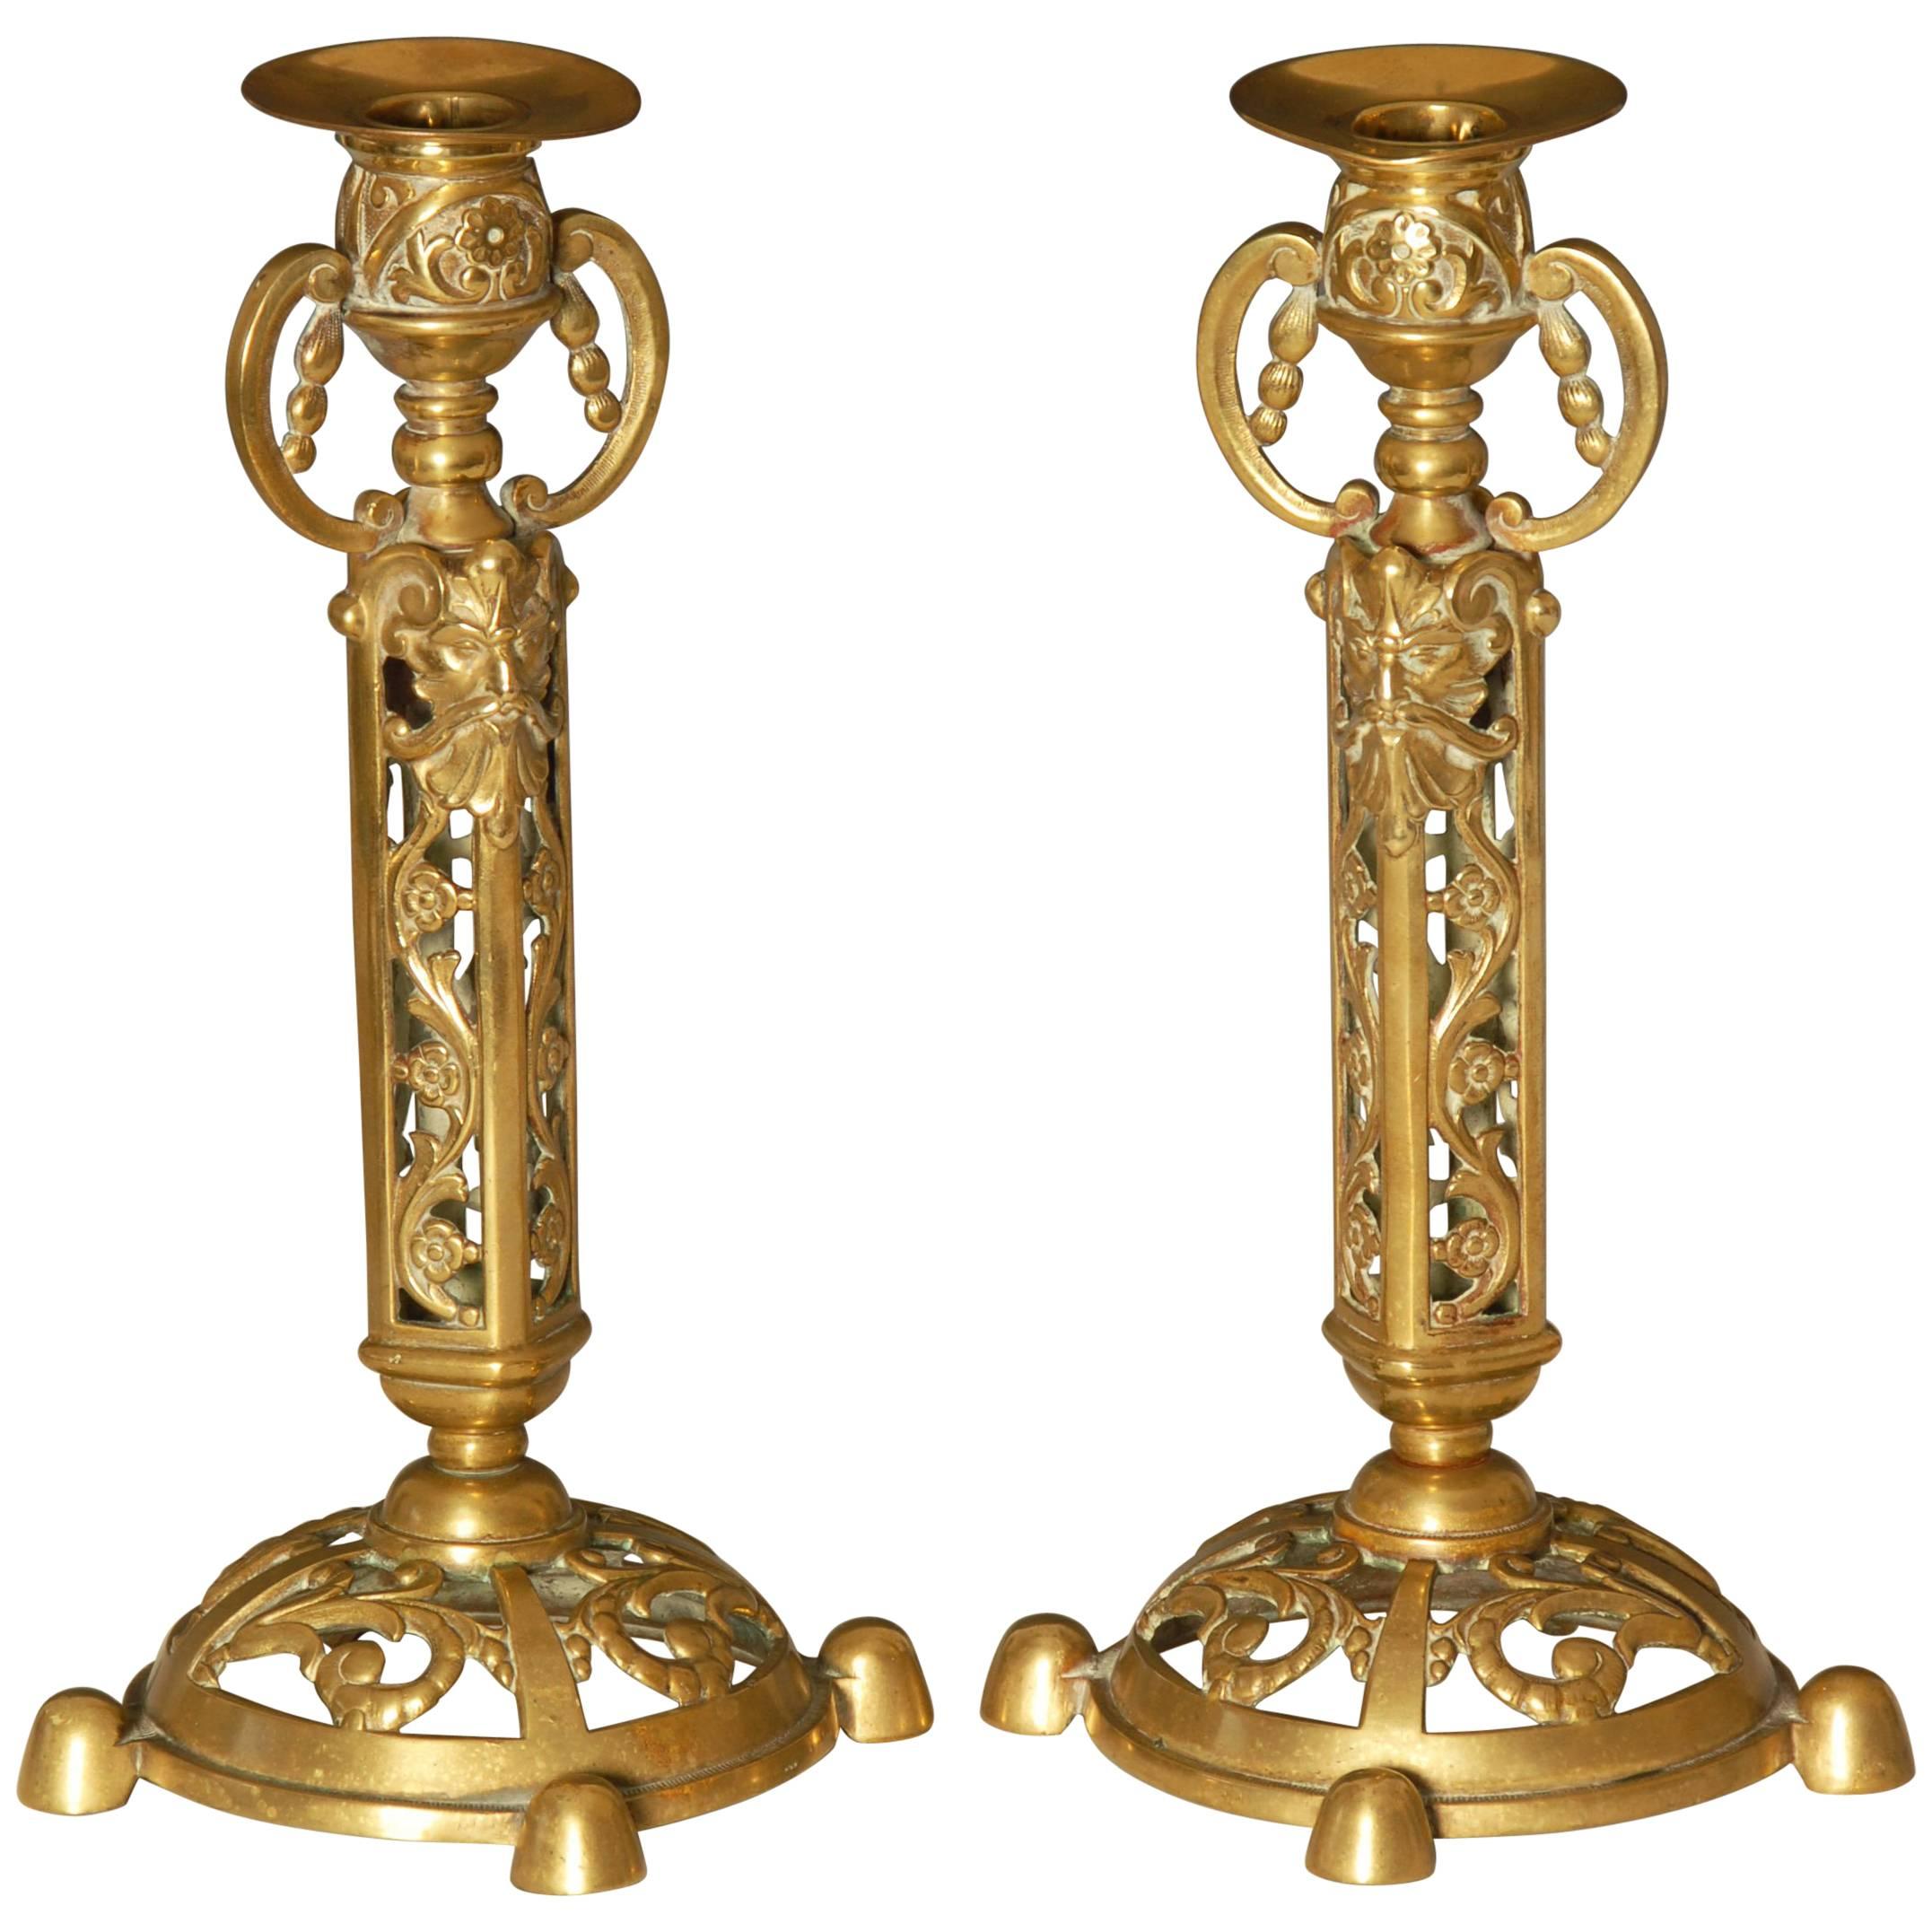 Pair of Brass Victorian Candlesticks with Satanic Faces by William Tonks and Son For Sale